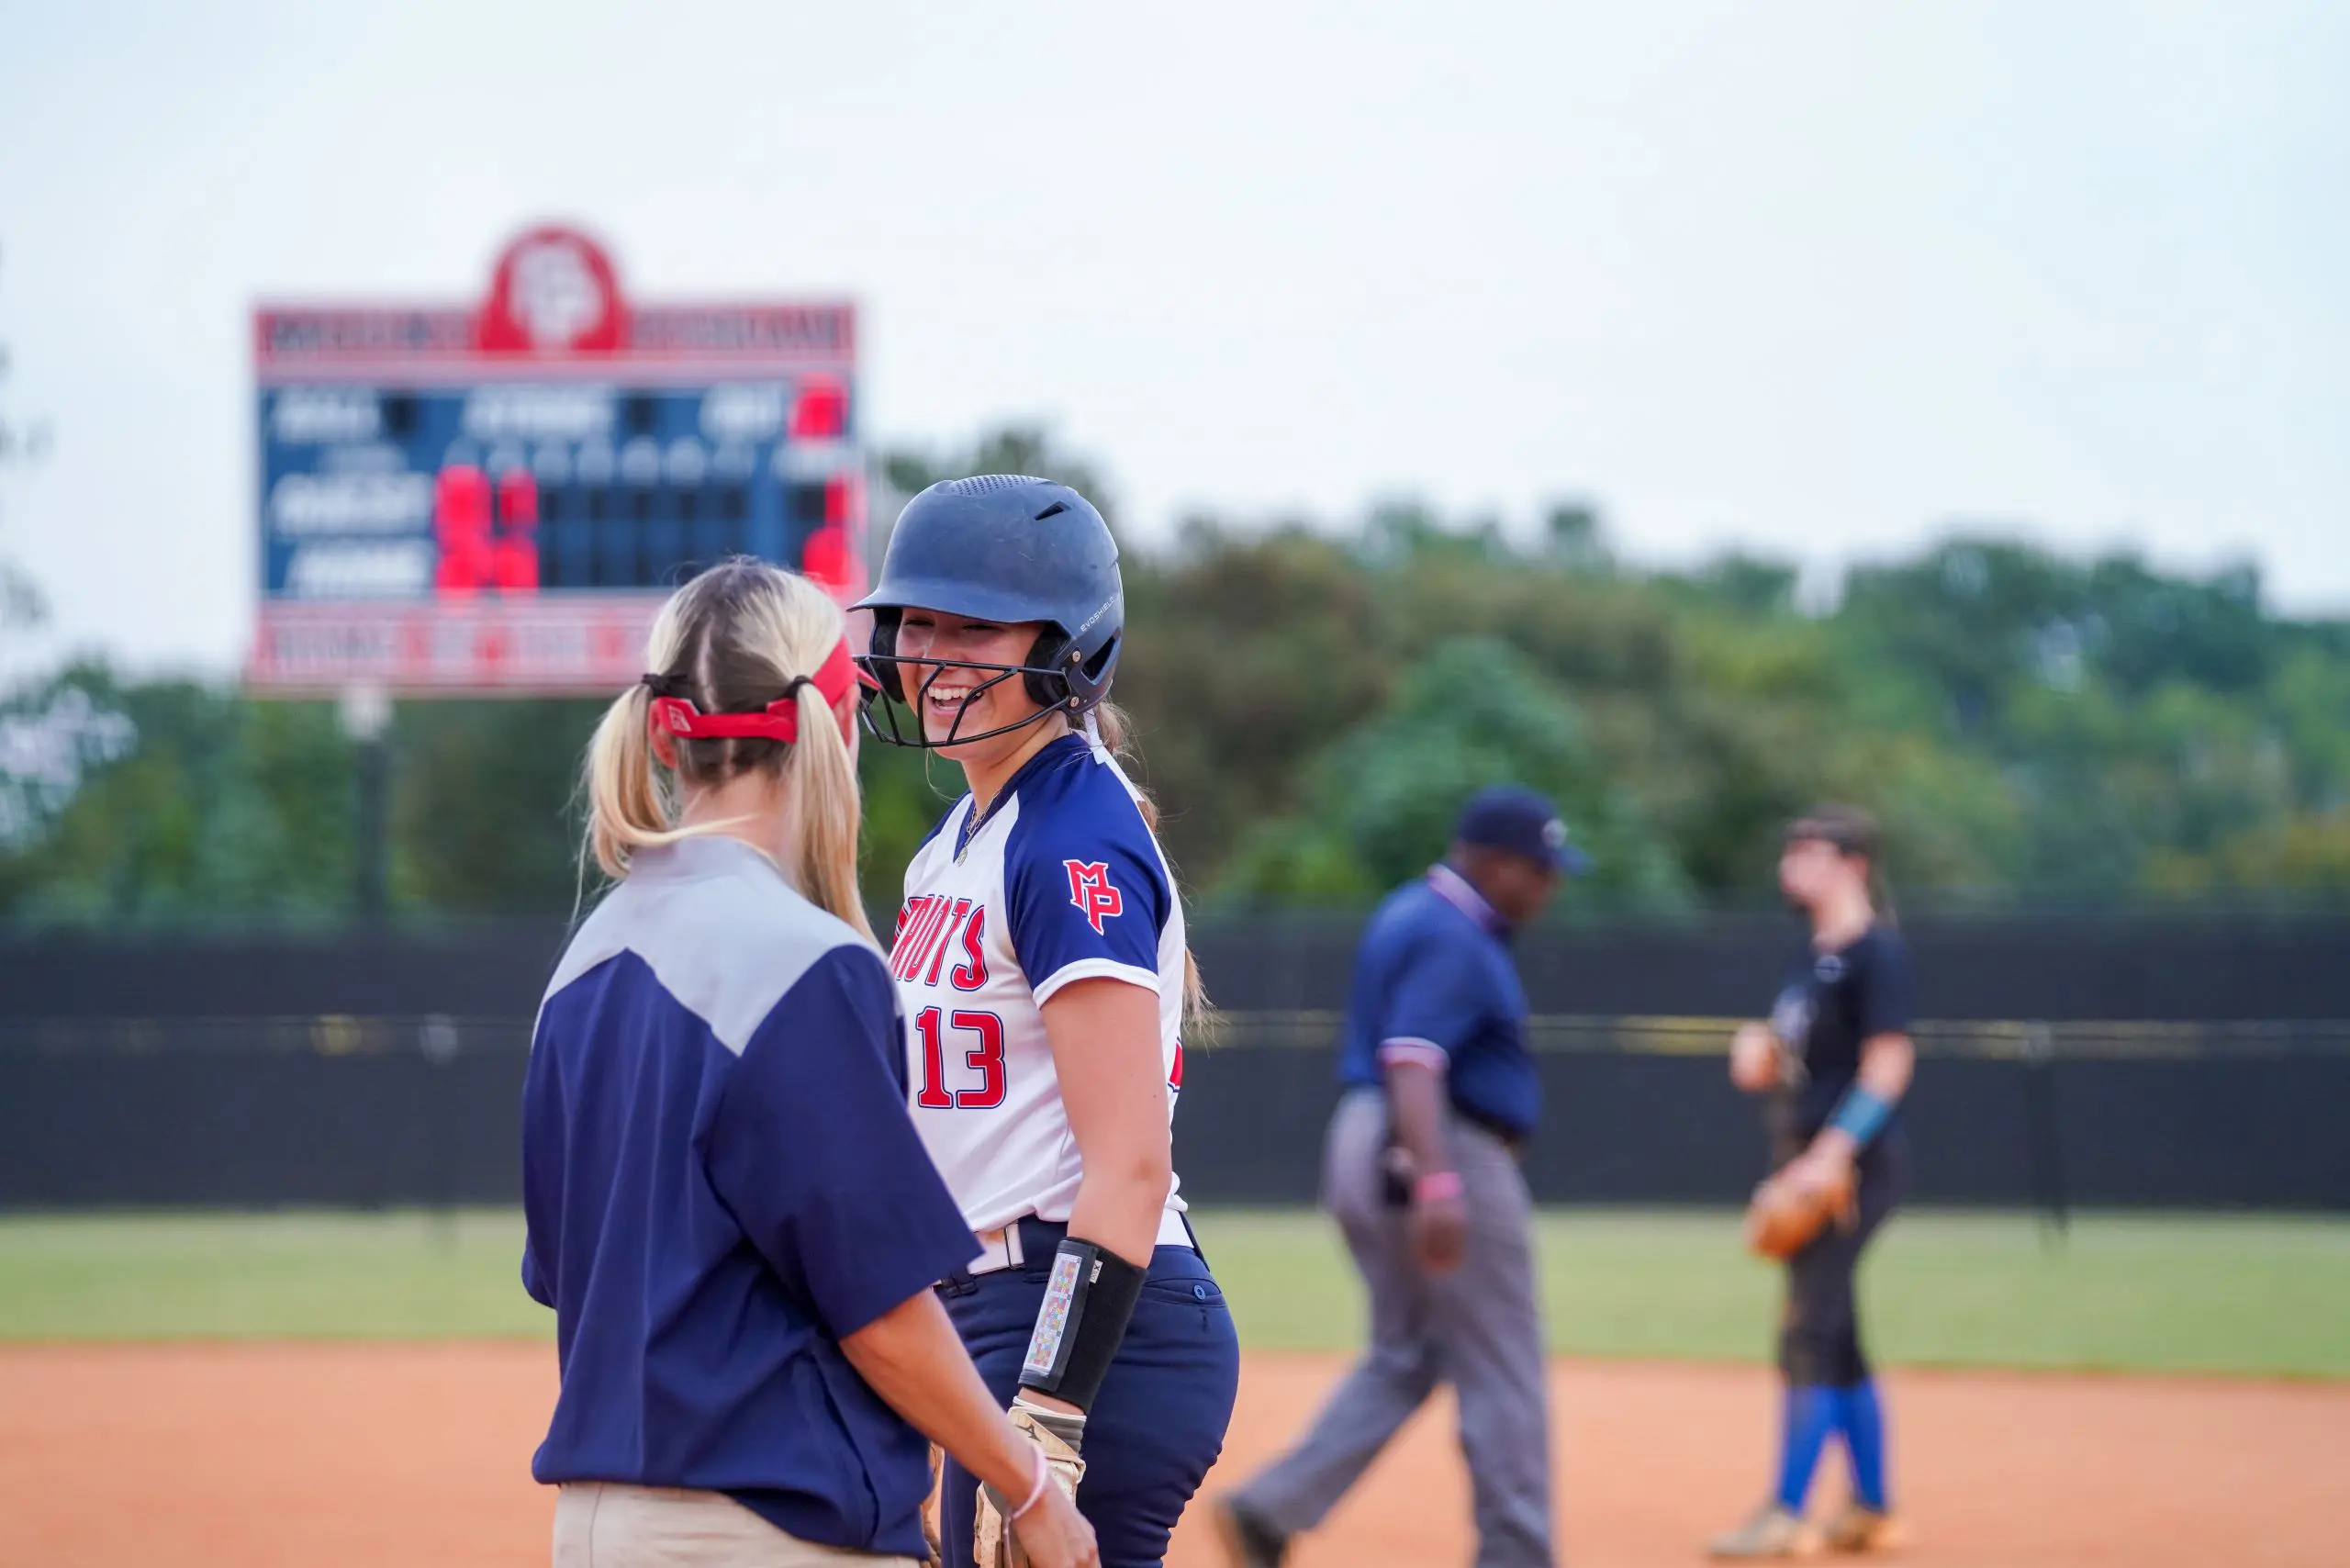 Softball player talks to coach on the field